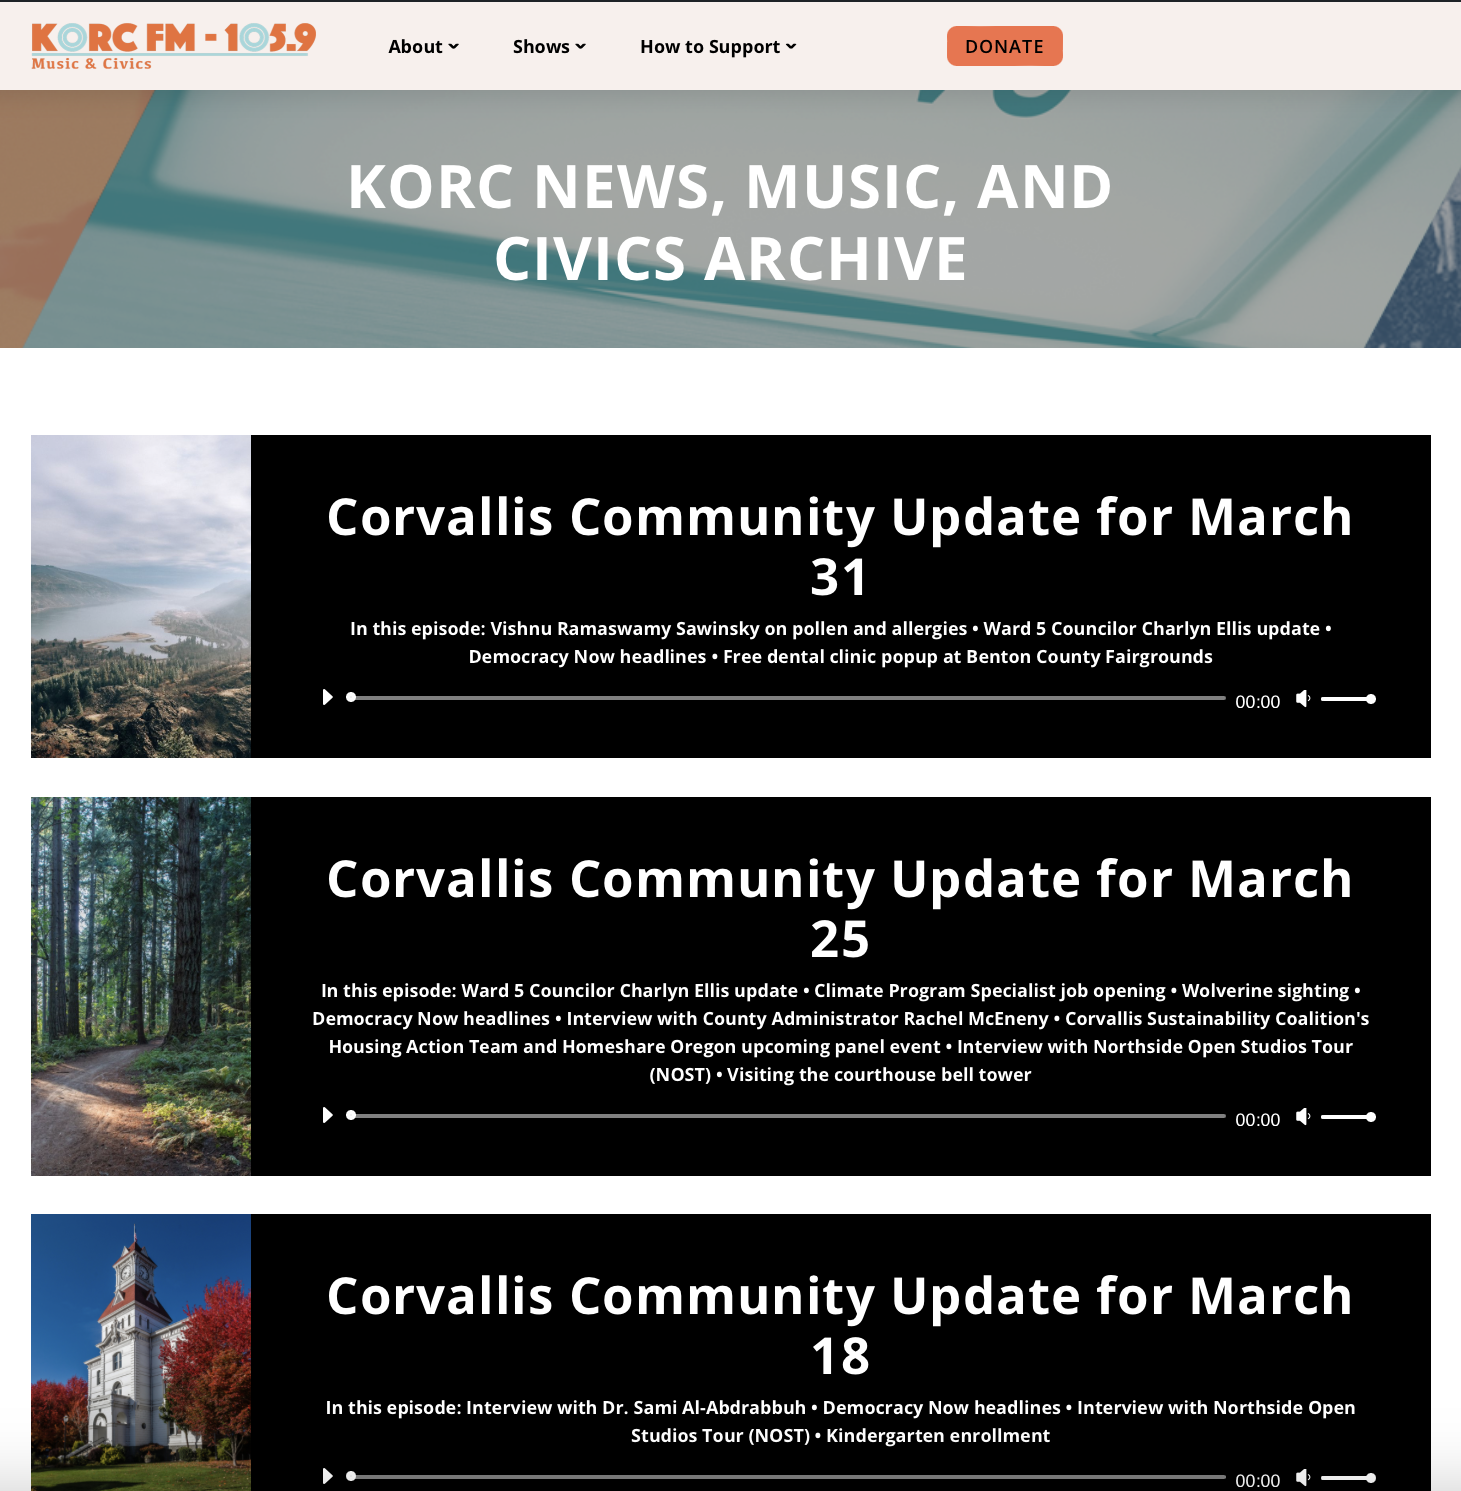 Screenshot of the News, Music, and Civics archive page.